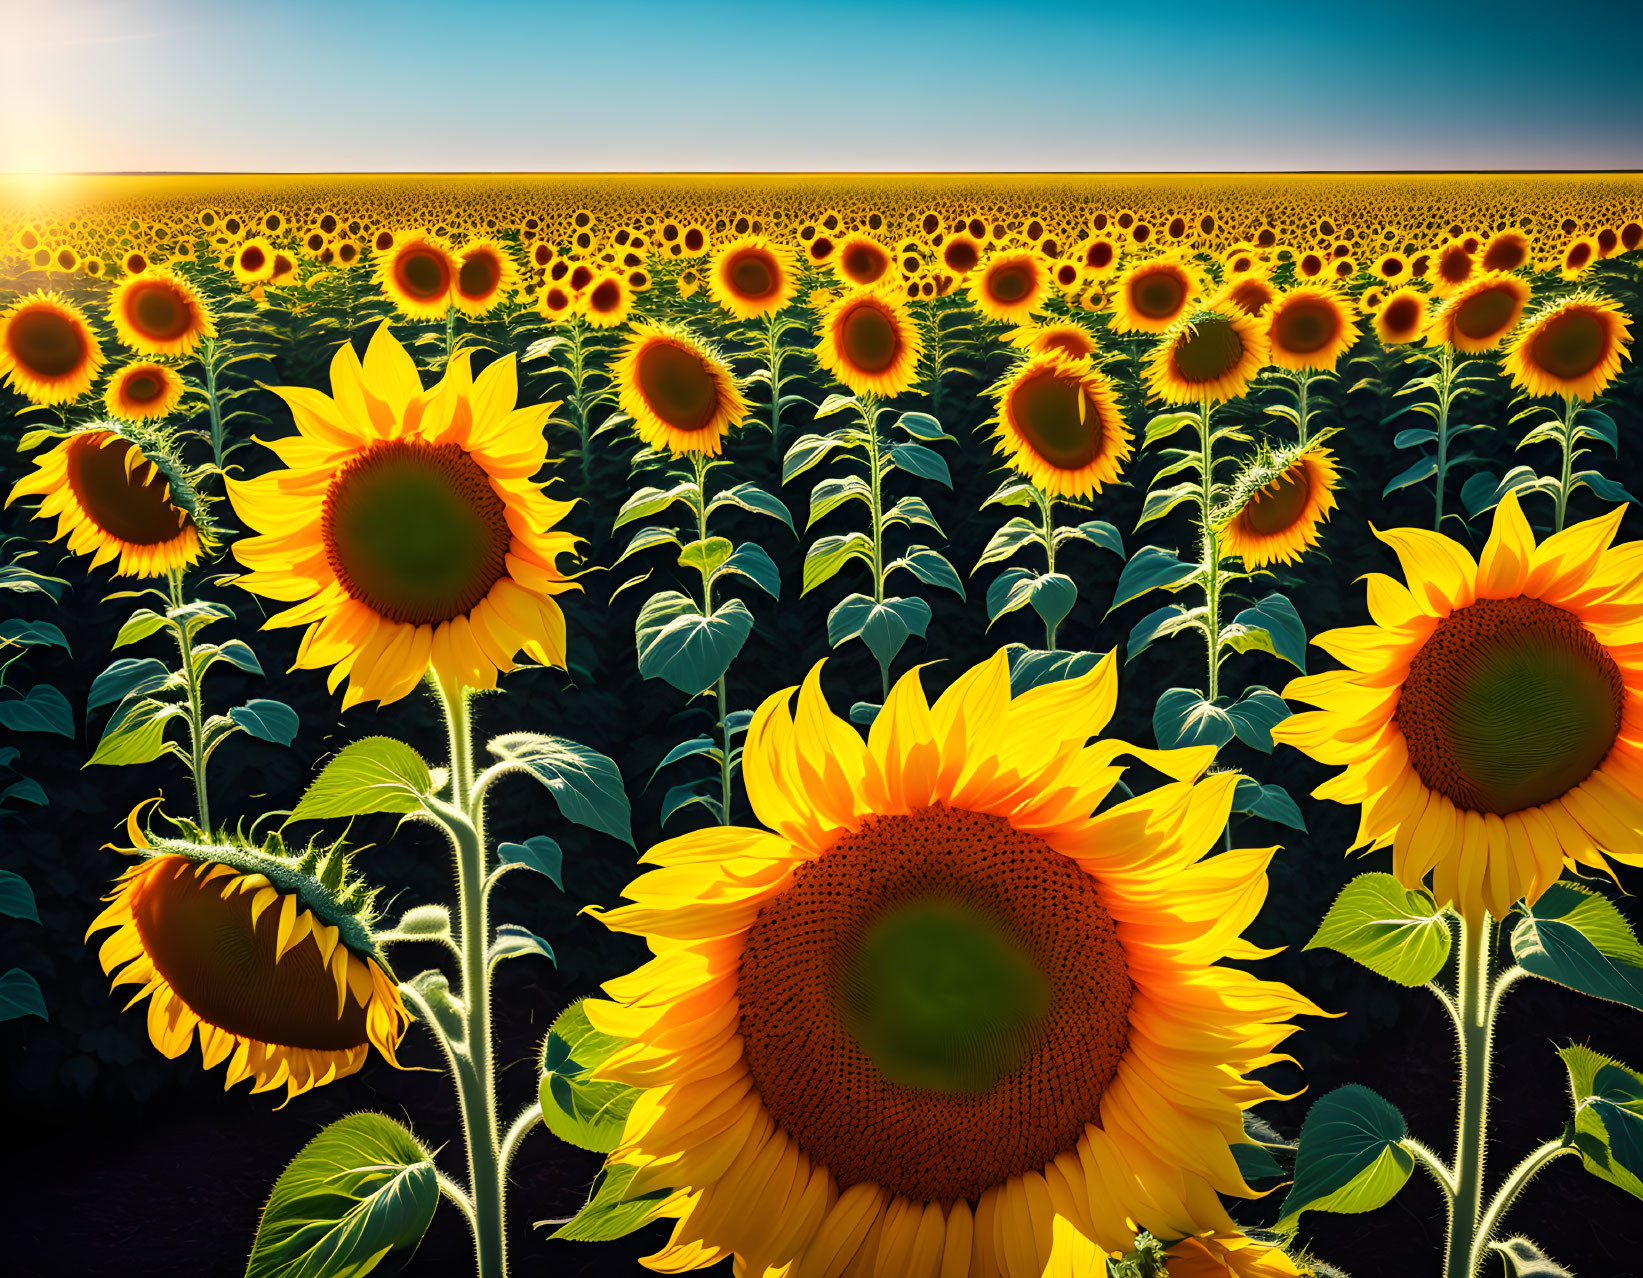 Field of sunflowers in the sun